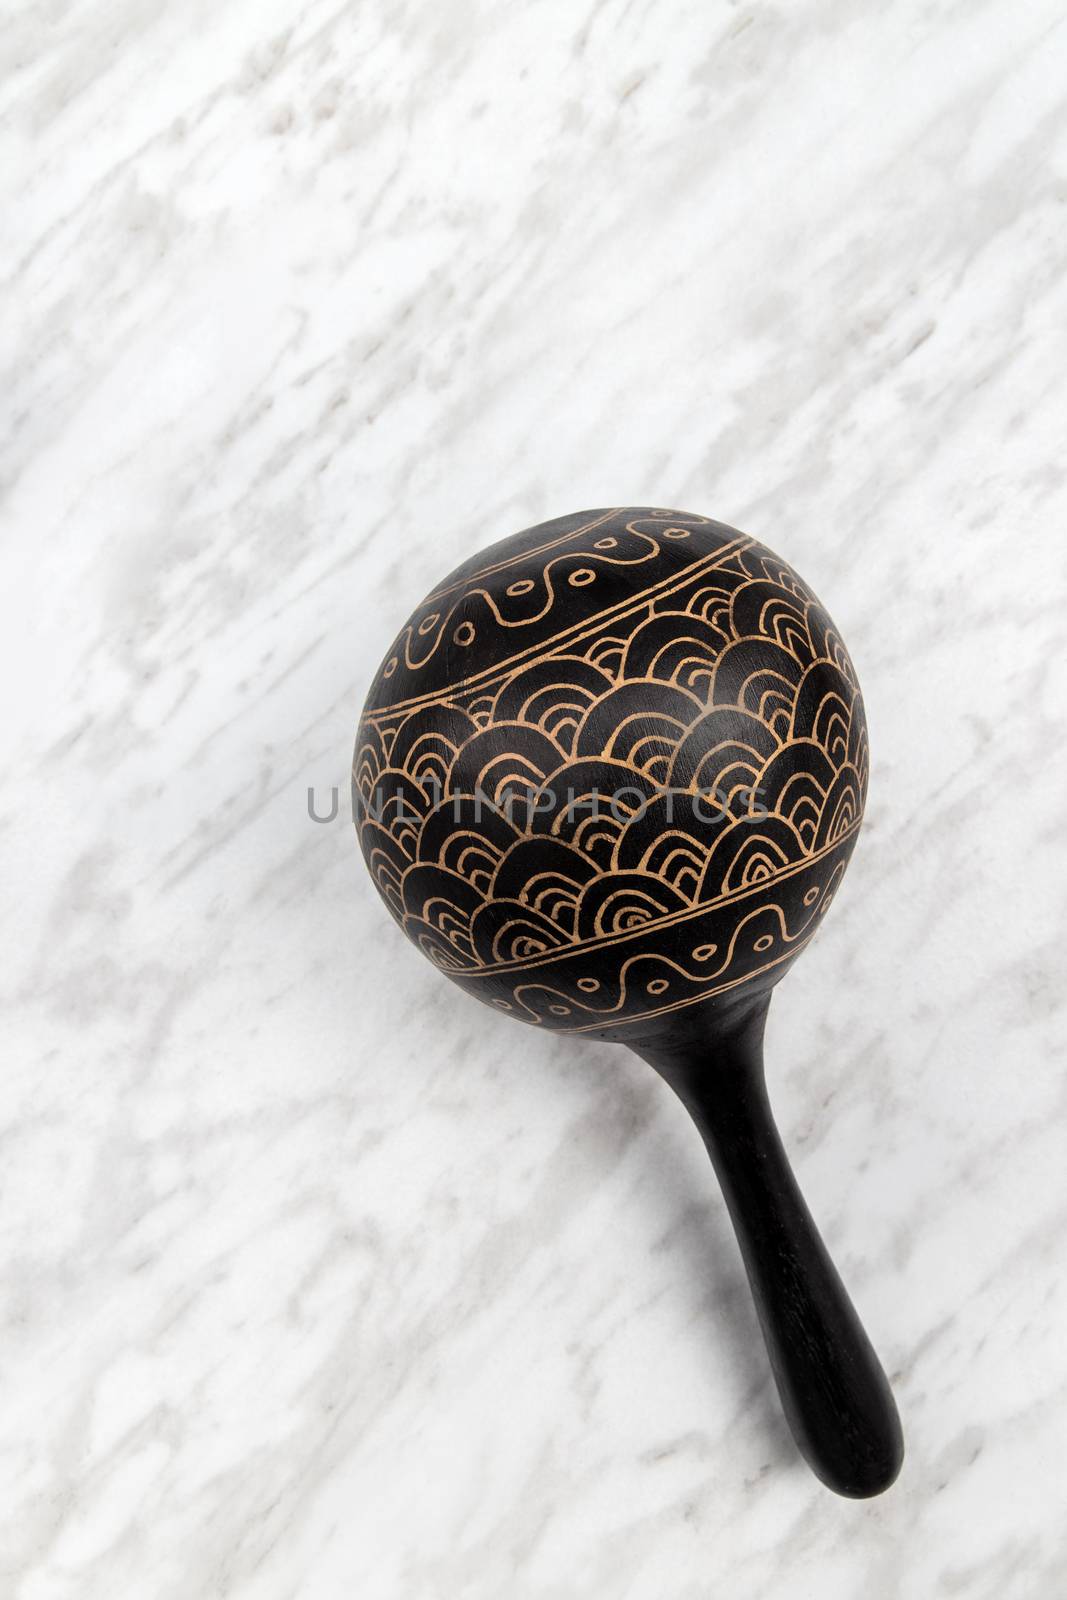 Maracas percussion instrument on marble background by anikasalsera